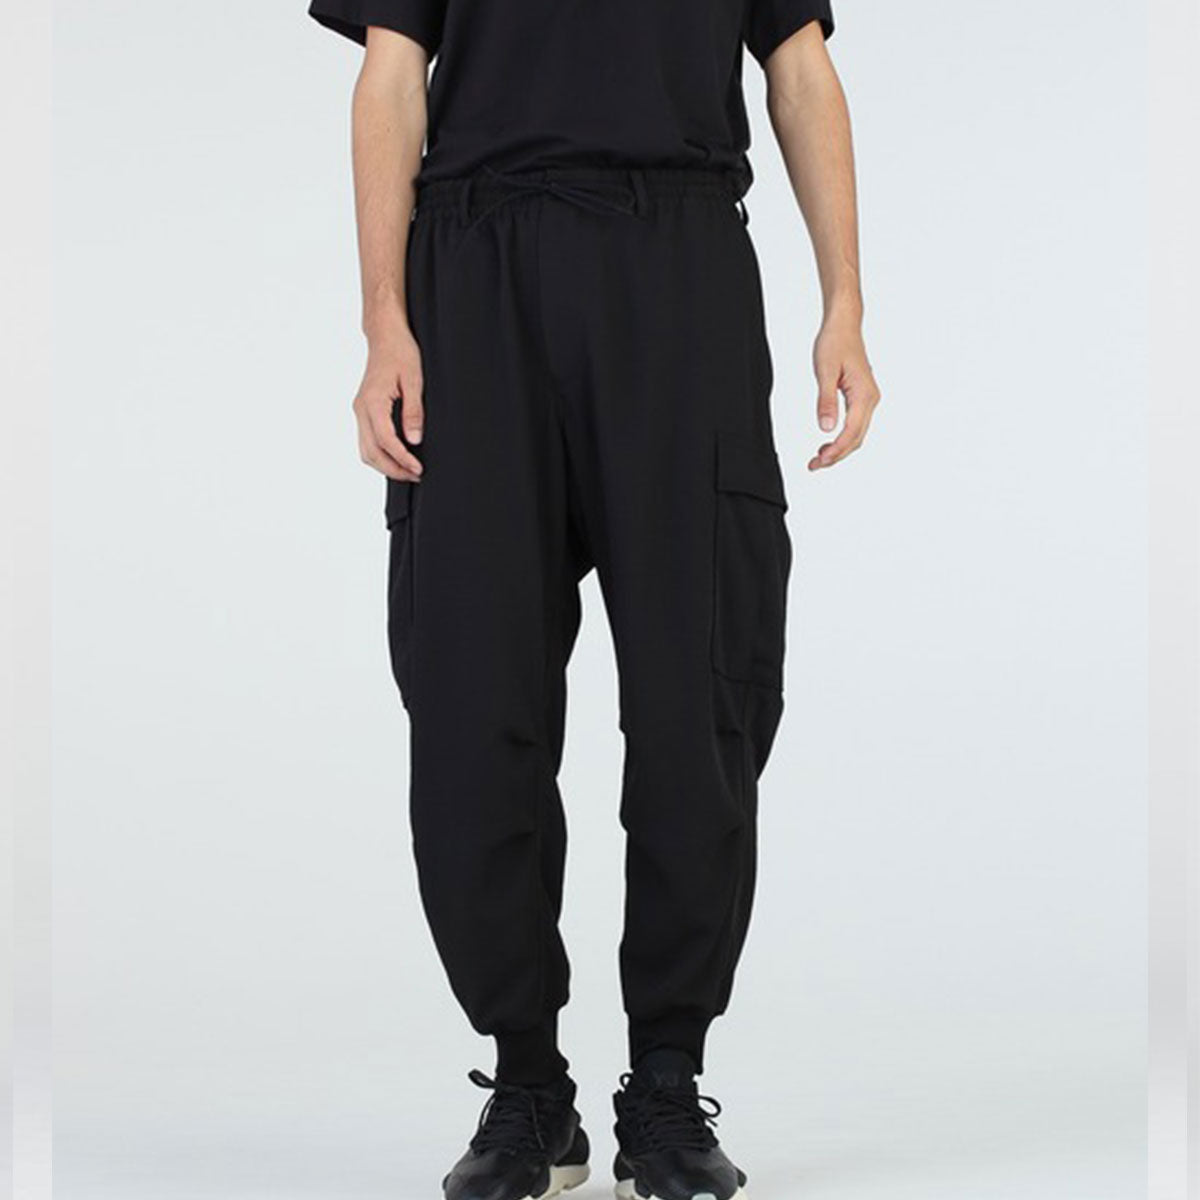 M CLASSIC SPORT UNIFORM CUFFED CARGO PANTS - Why are you here?